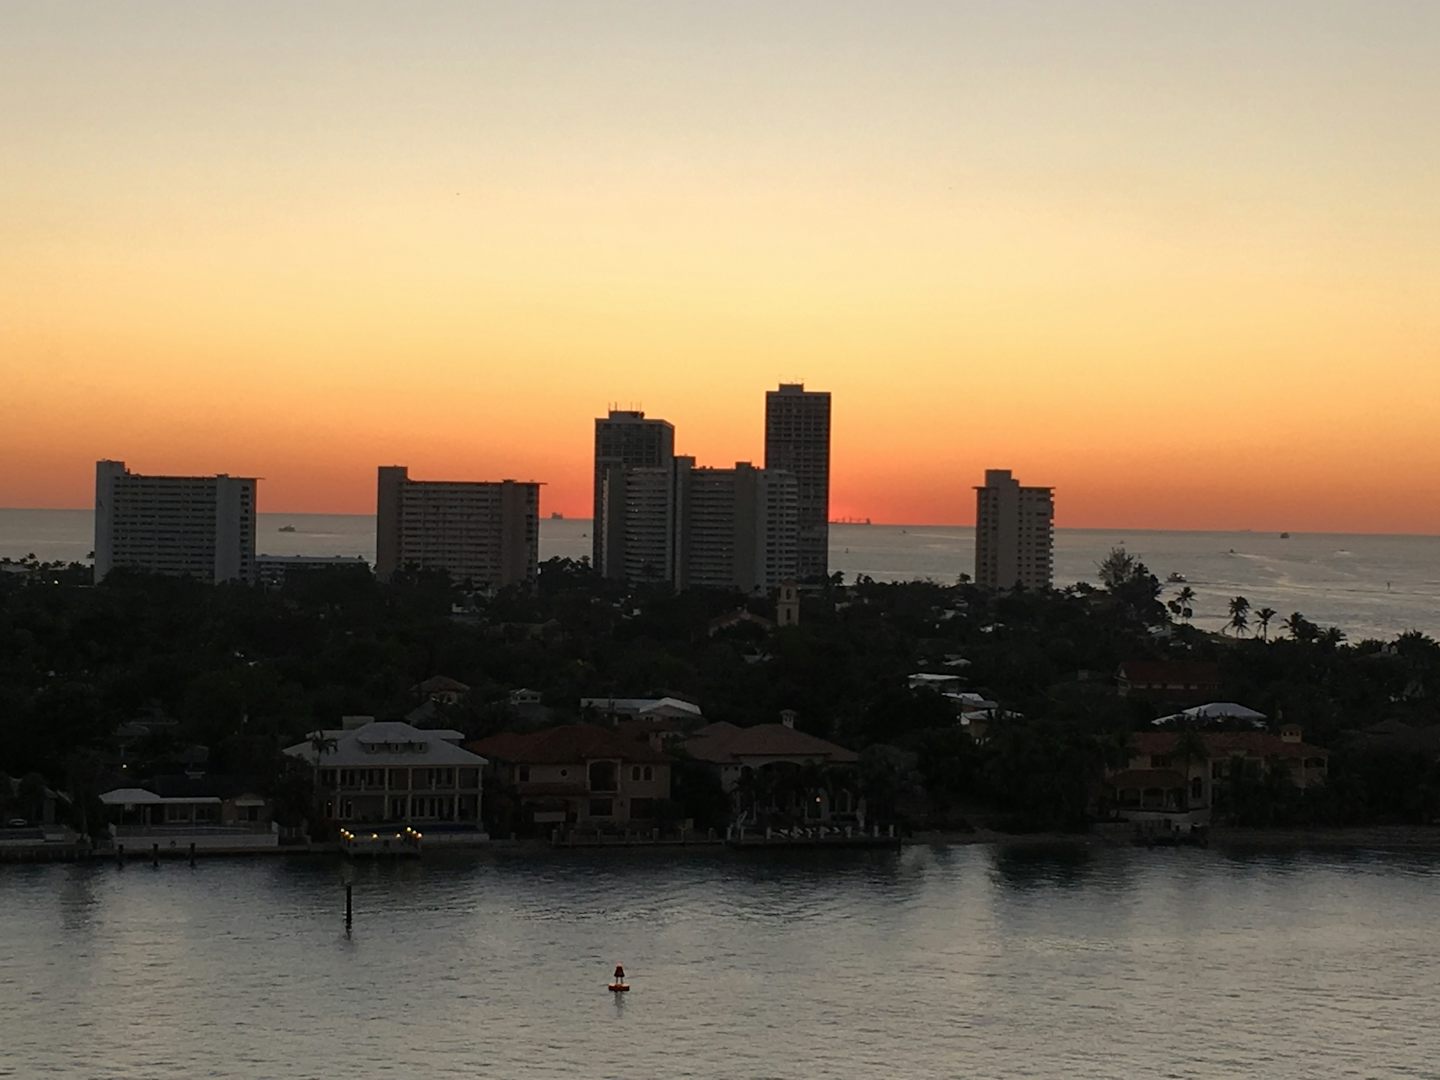 Sunrise as we arrive back to Ft Lauderdale